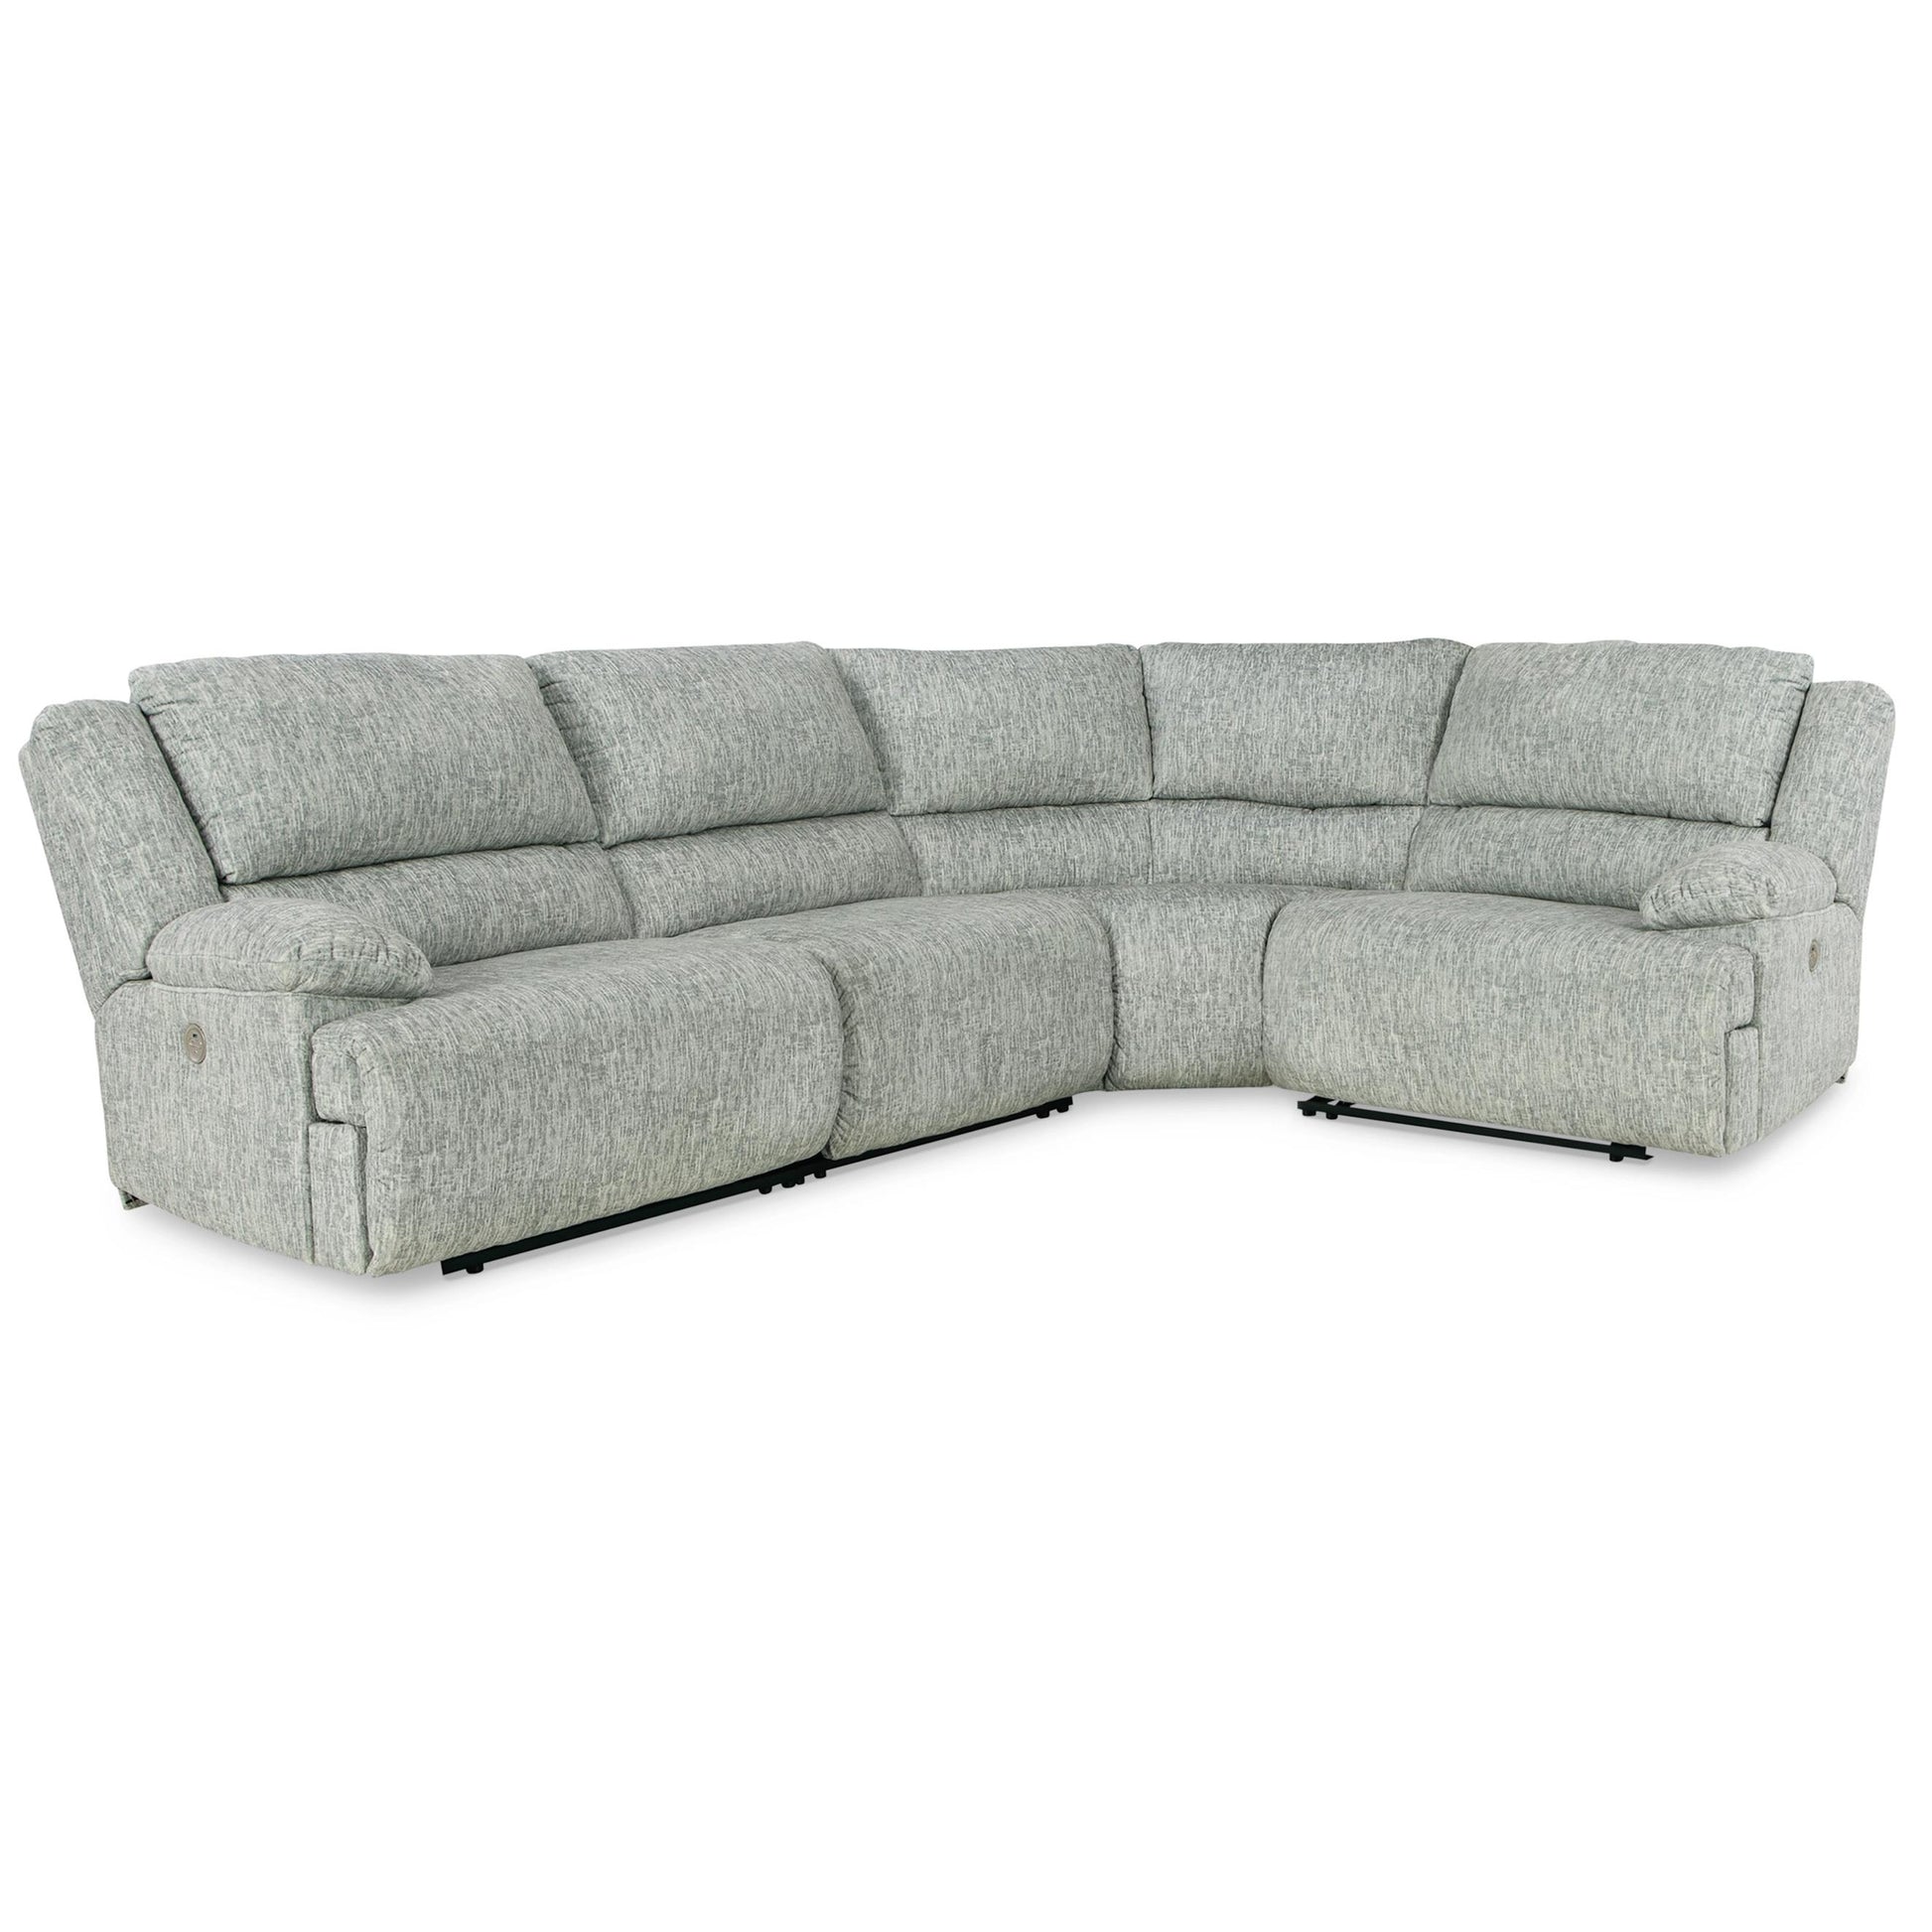 Signature Design by Ashley McClelland Power Reclining Fabric 4 pc Sectional 2930246/2930258/2930262/2930277 IMAGE 1